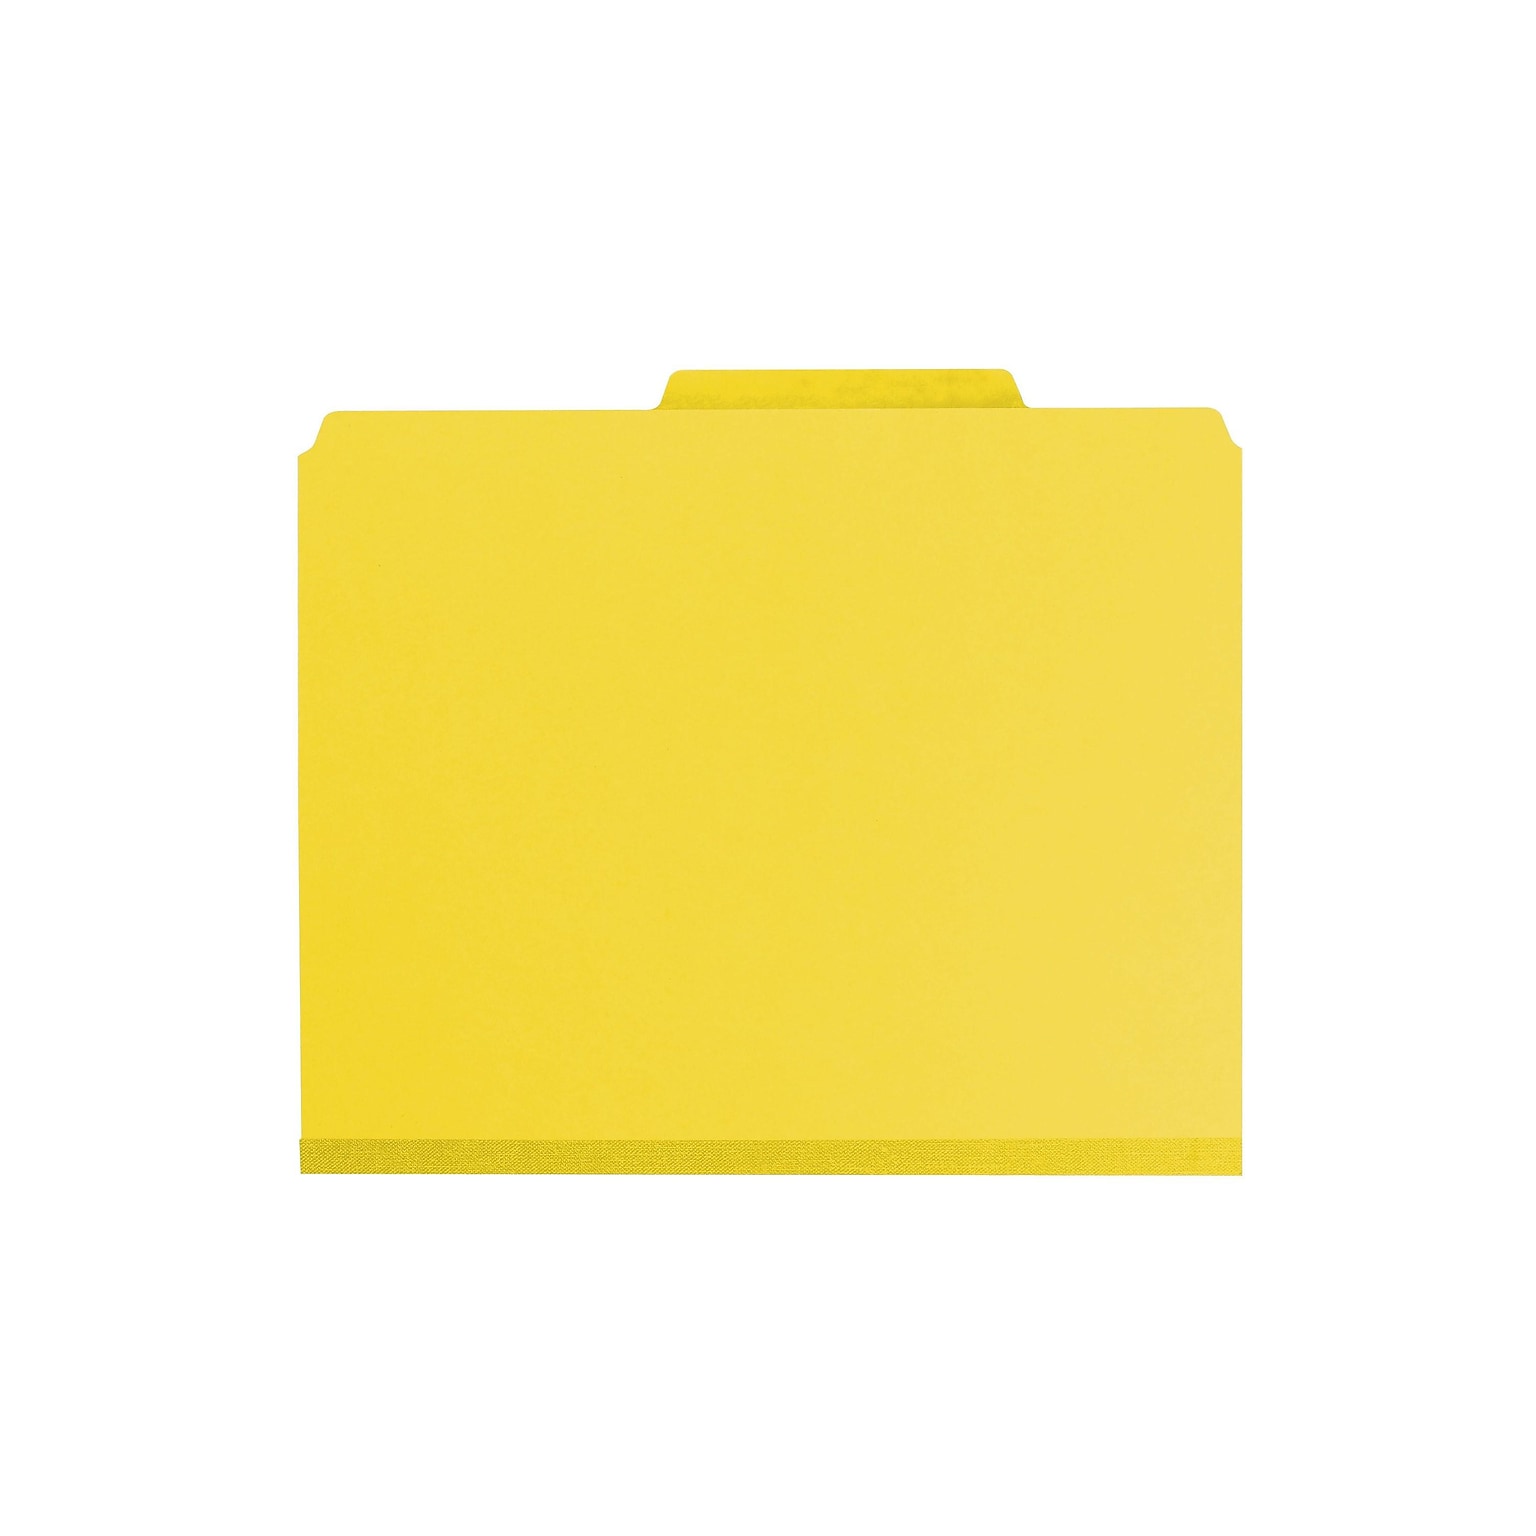 Smead Pressboard Classification Folders with SafeSHIELD Fasteners, 2 Expansion, Letter Size, 2 Dividers, Yellow, 10/Box (14034)